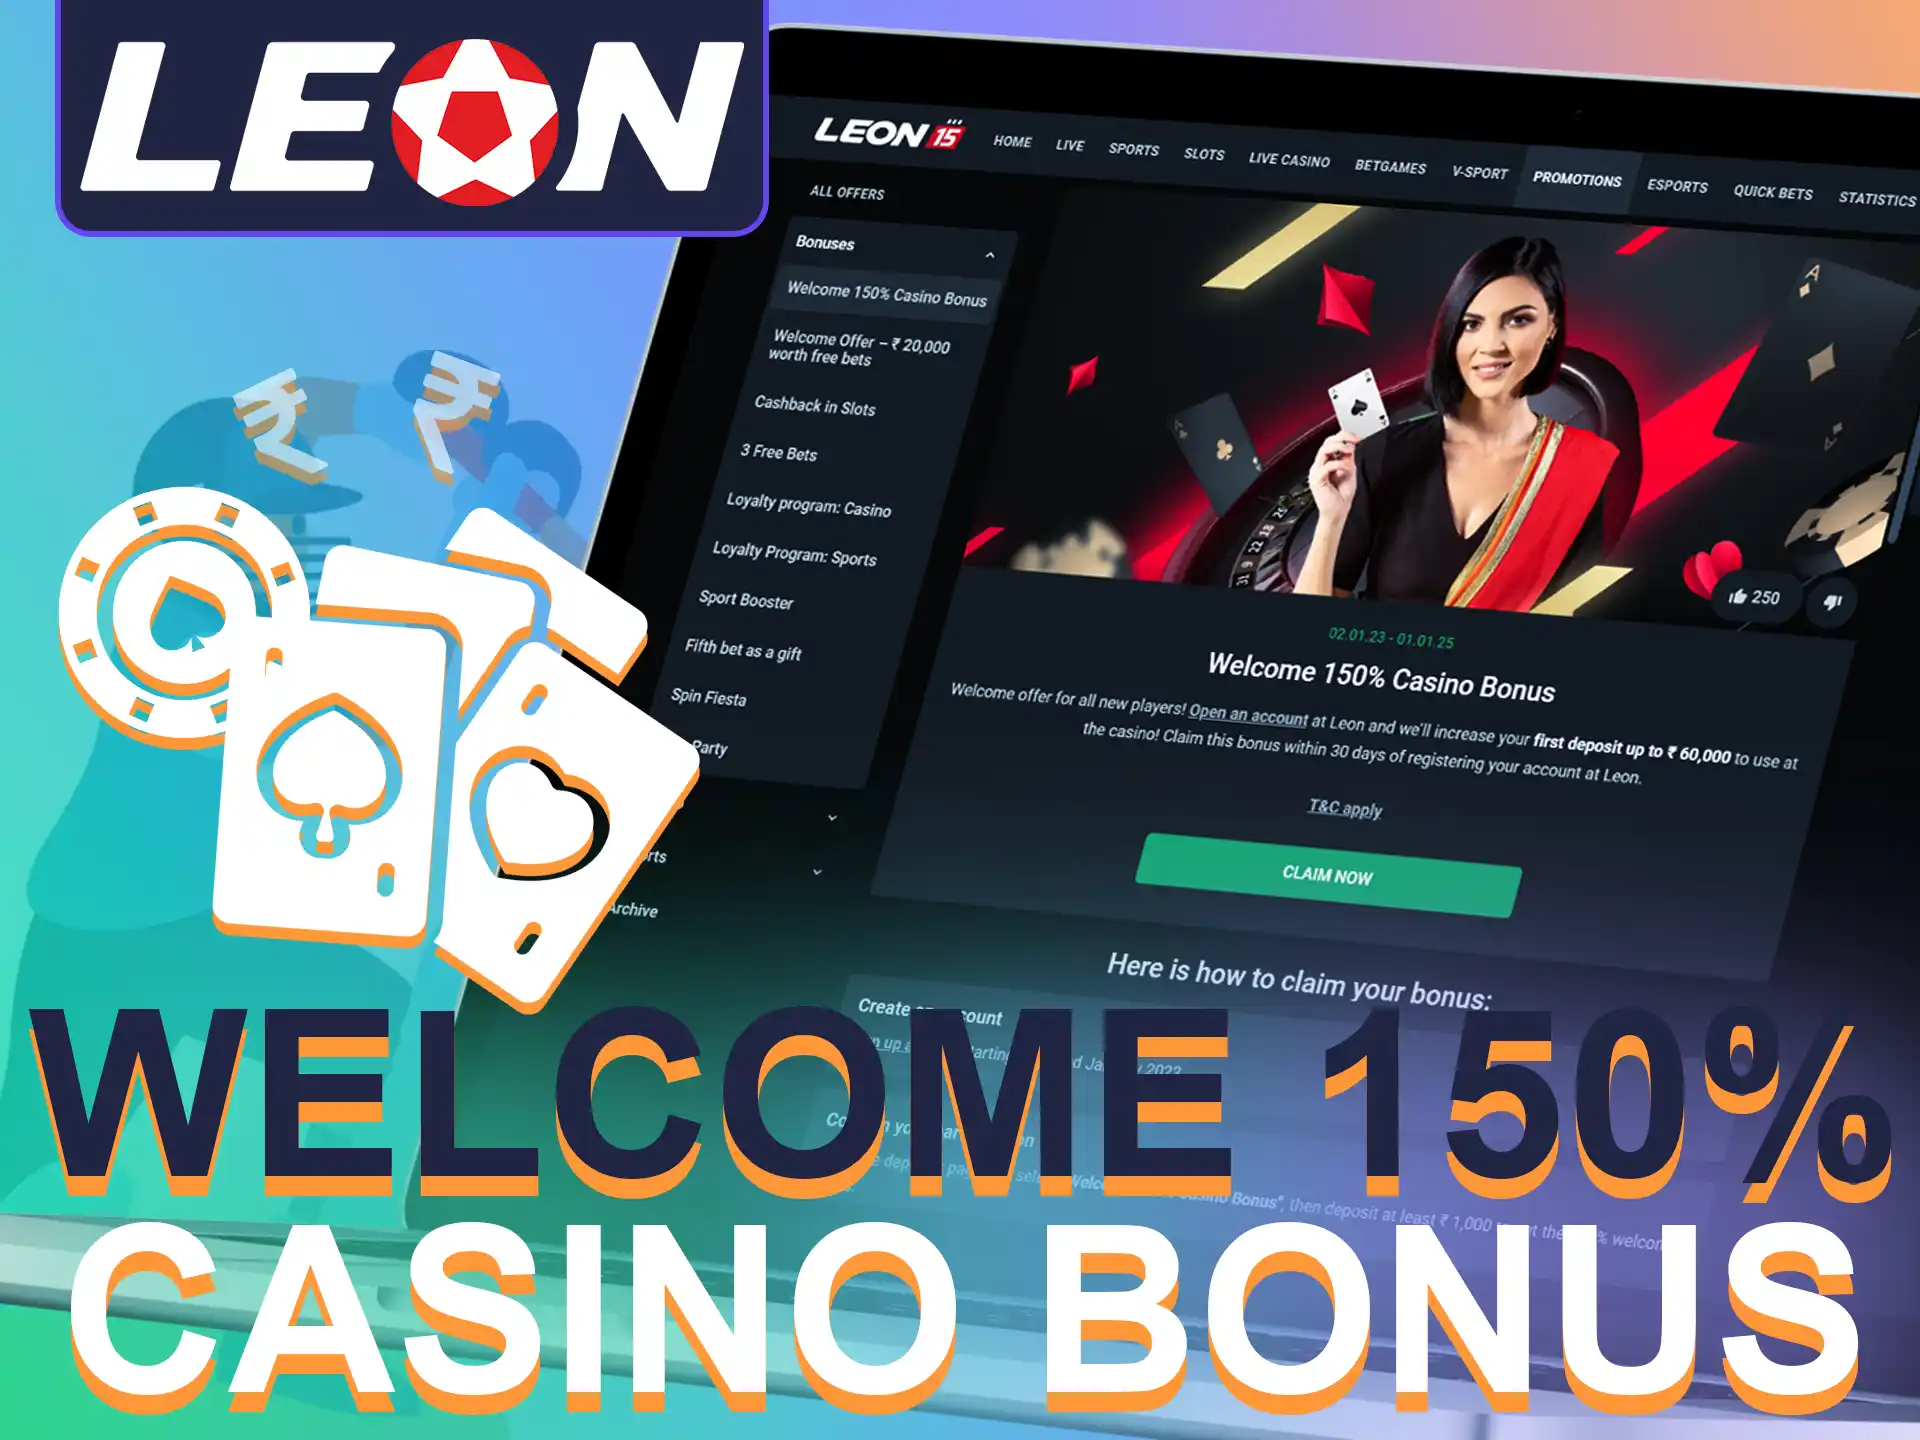 Increase your winnings to INR 60,000 with Leon Bet Casino's 150% welcome bonus.